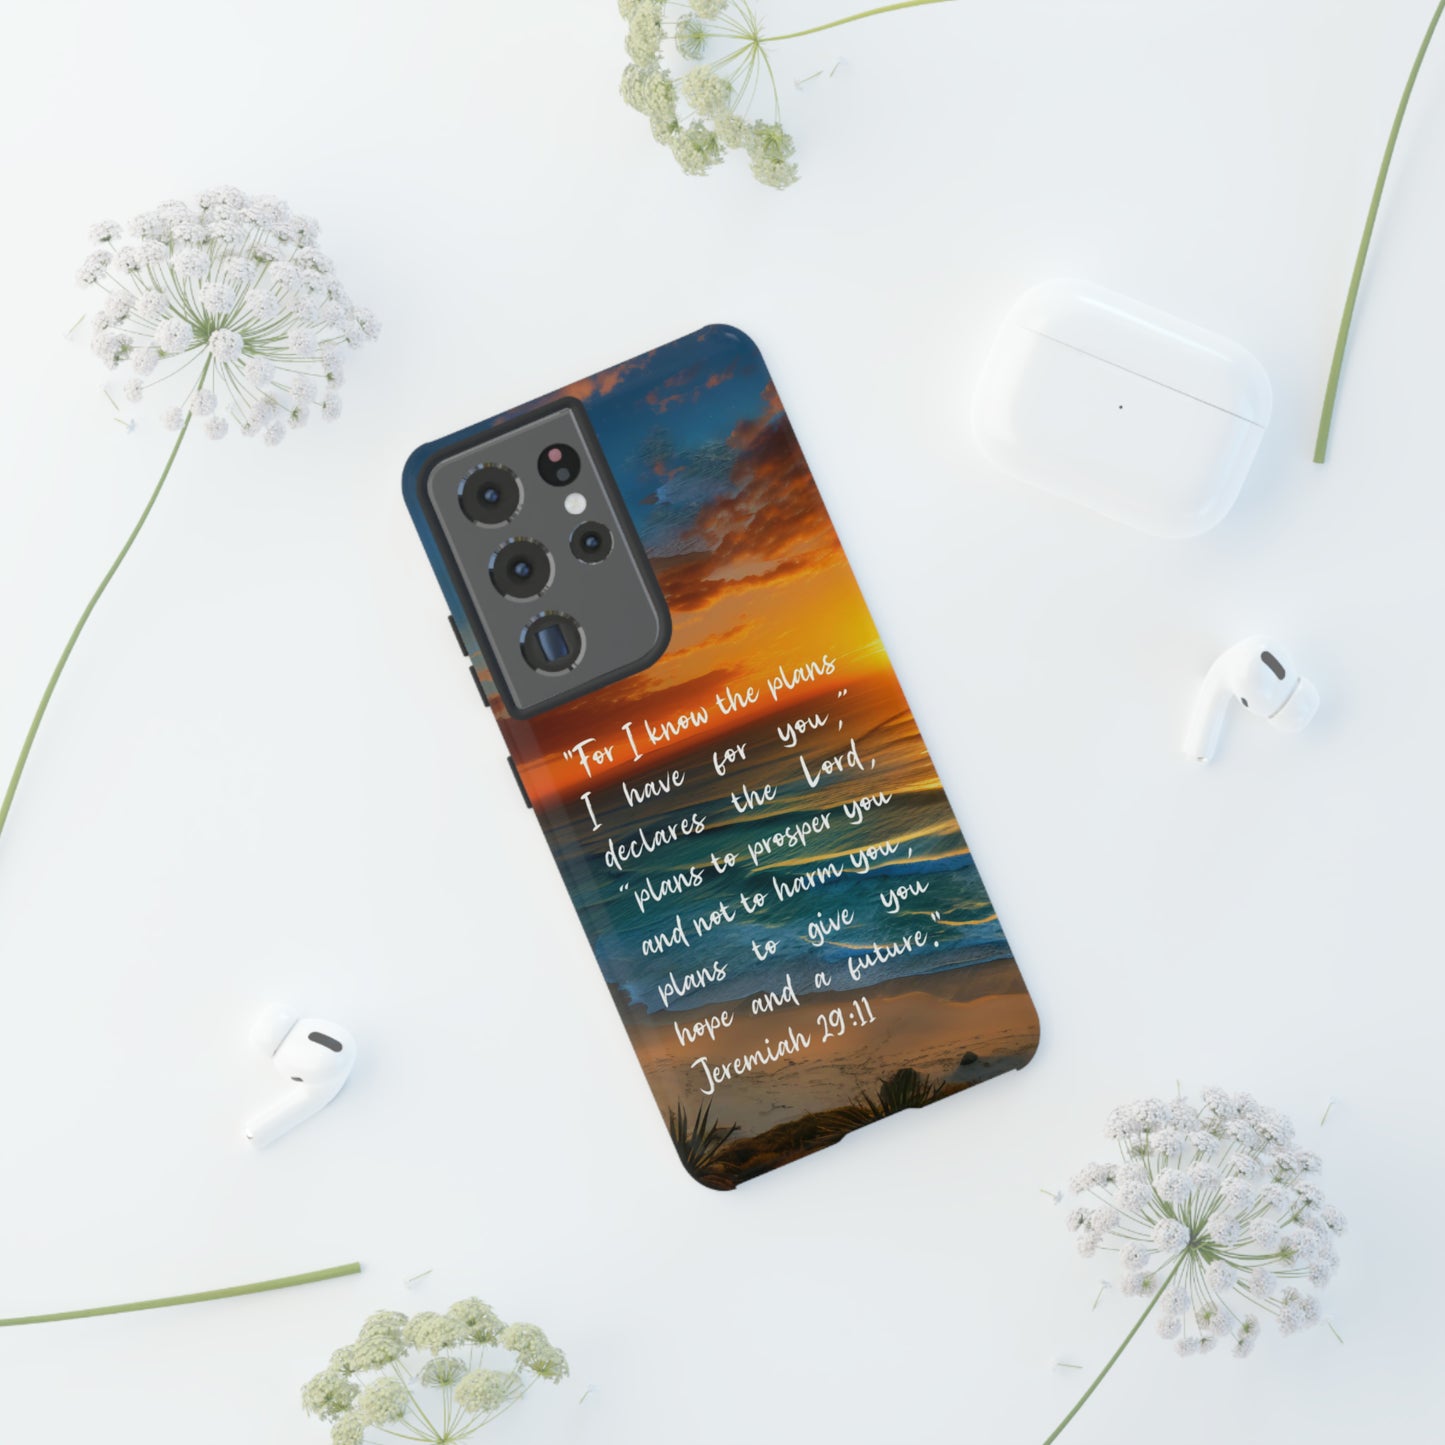 Jeremiah 29:11 Tough Christian Phone Case iPhone Samsung Galaxy Google Pixel I Know The Plans I Have For You Christian Cell Phone Cases